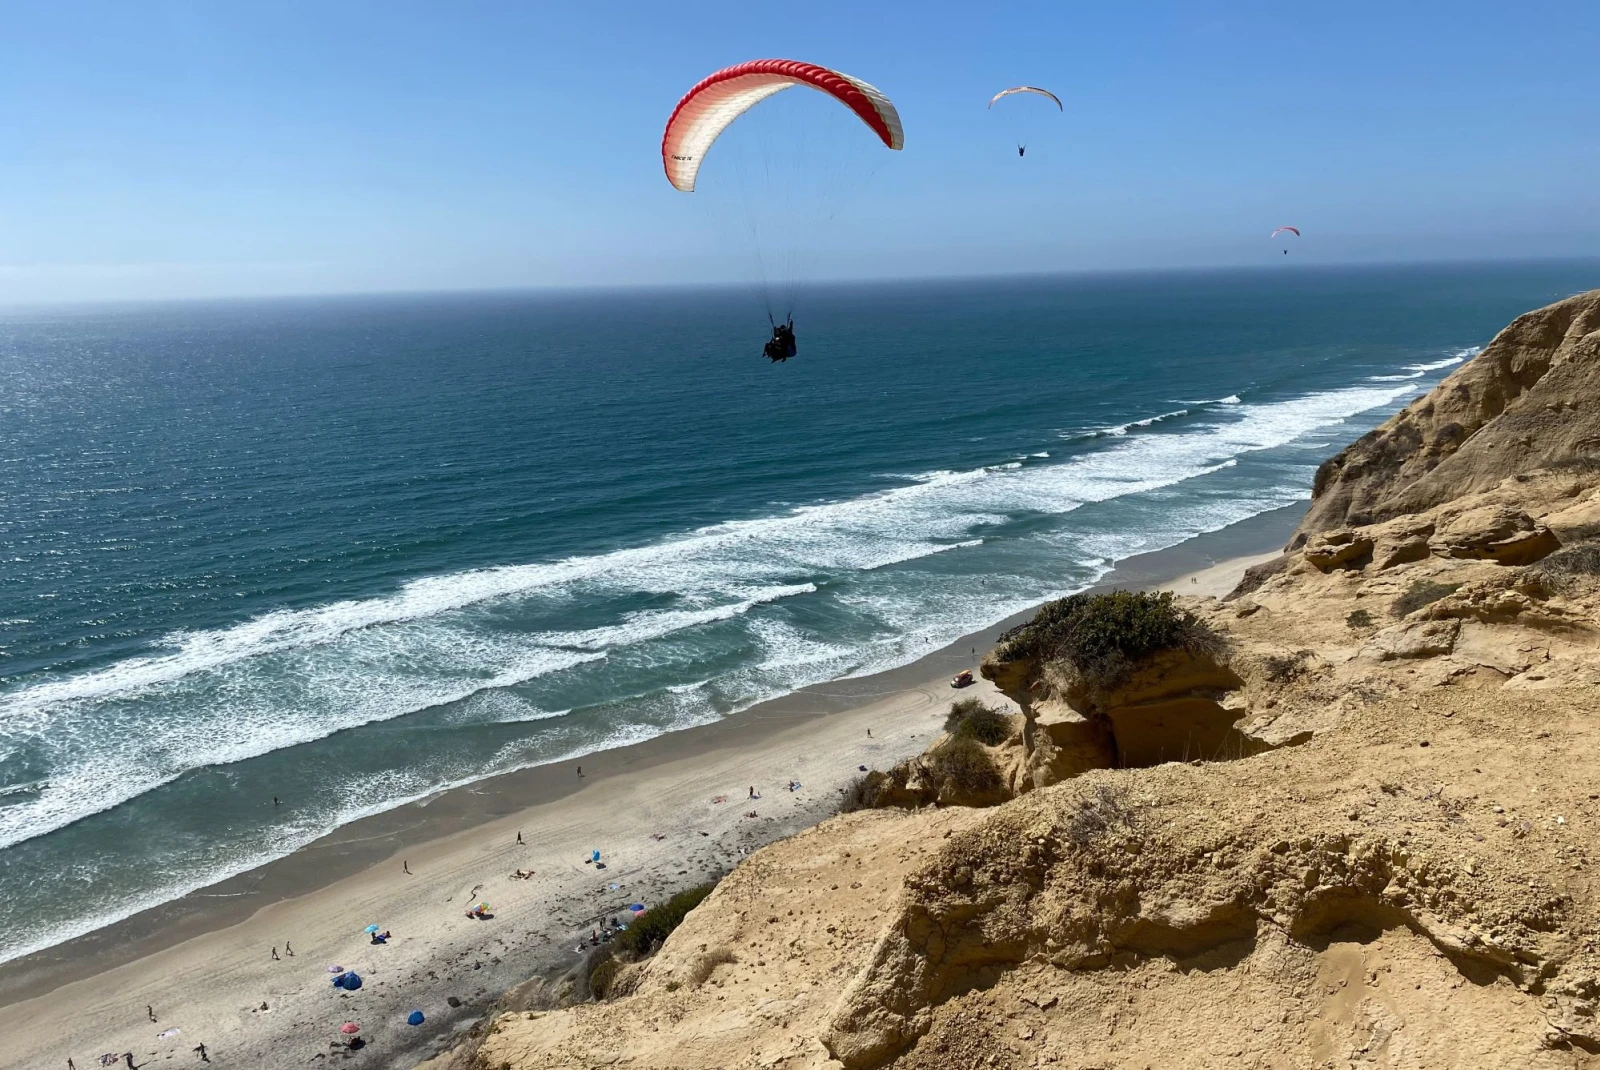 hang glider with a red sail over the coast with bright blue sky